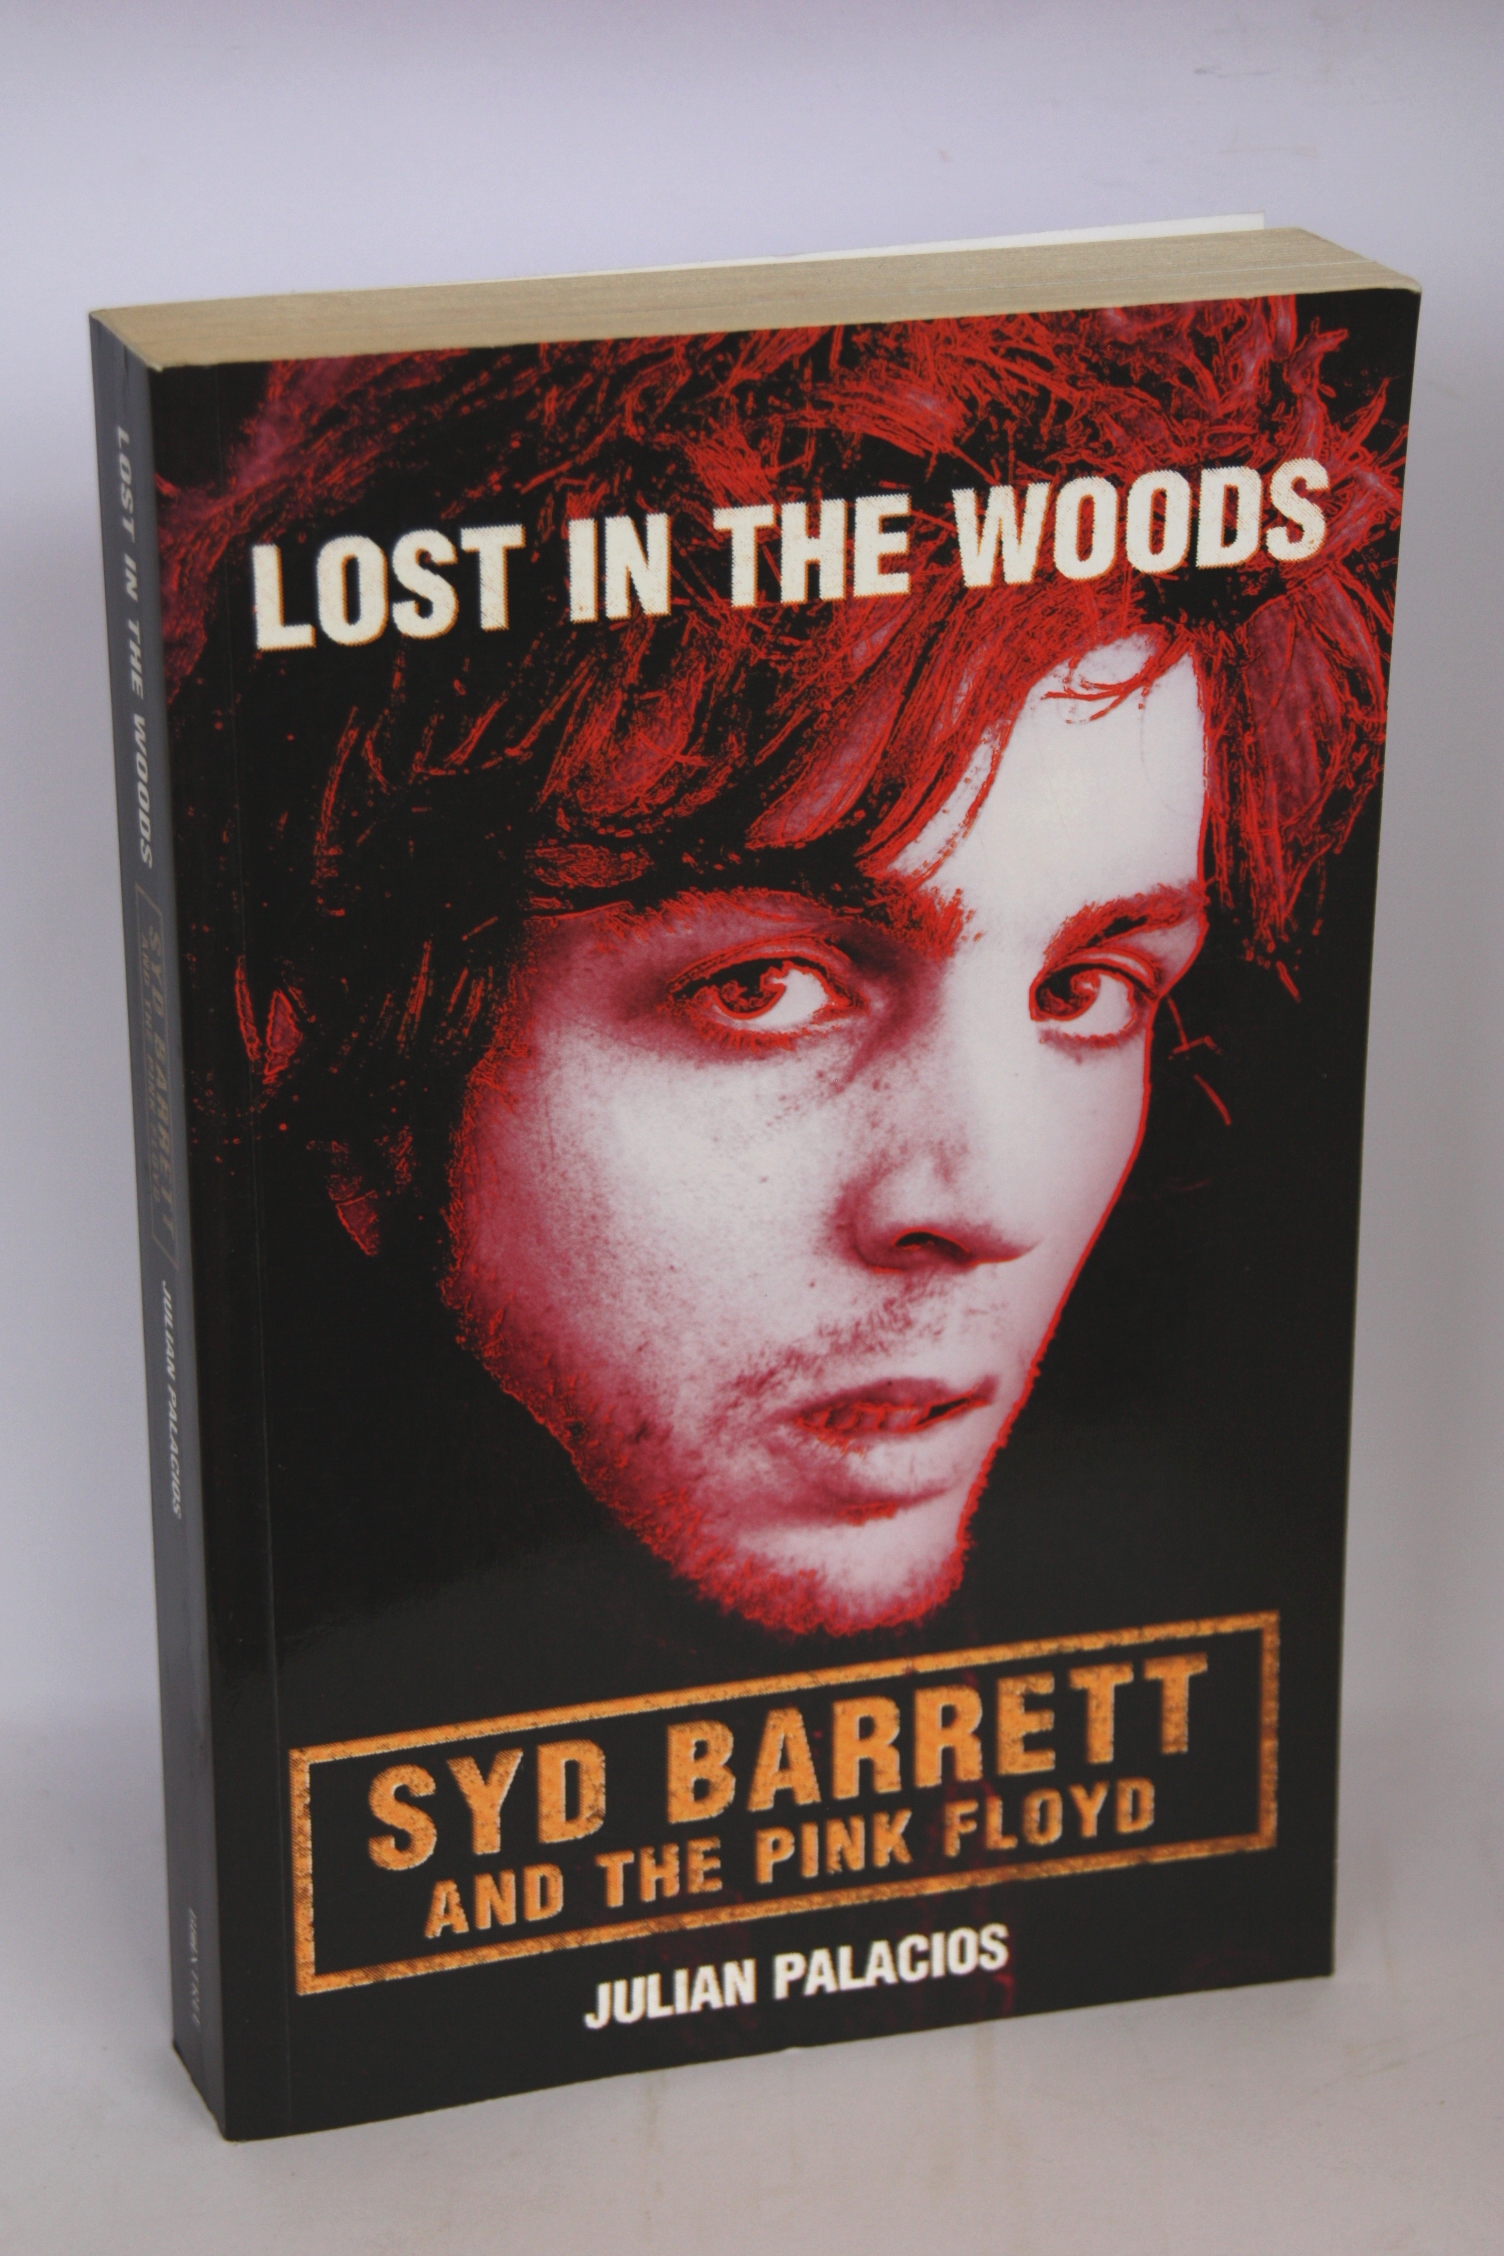 Lost in the Woods Syd Barrett and the Pink Floyd - Julian Palacios